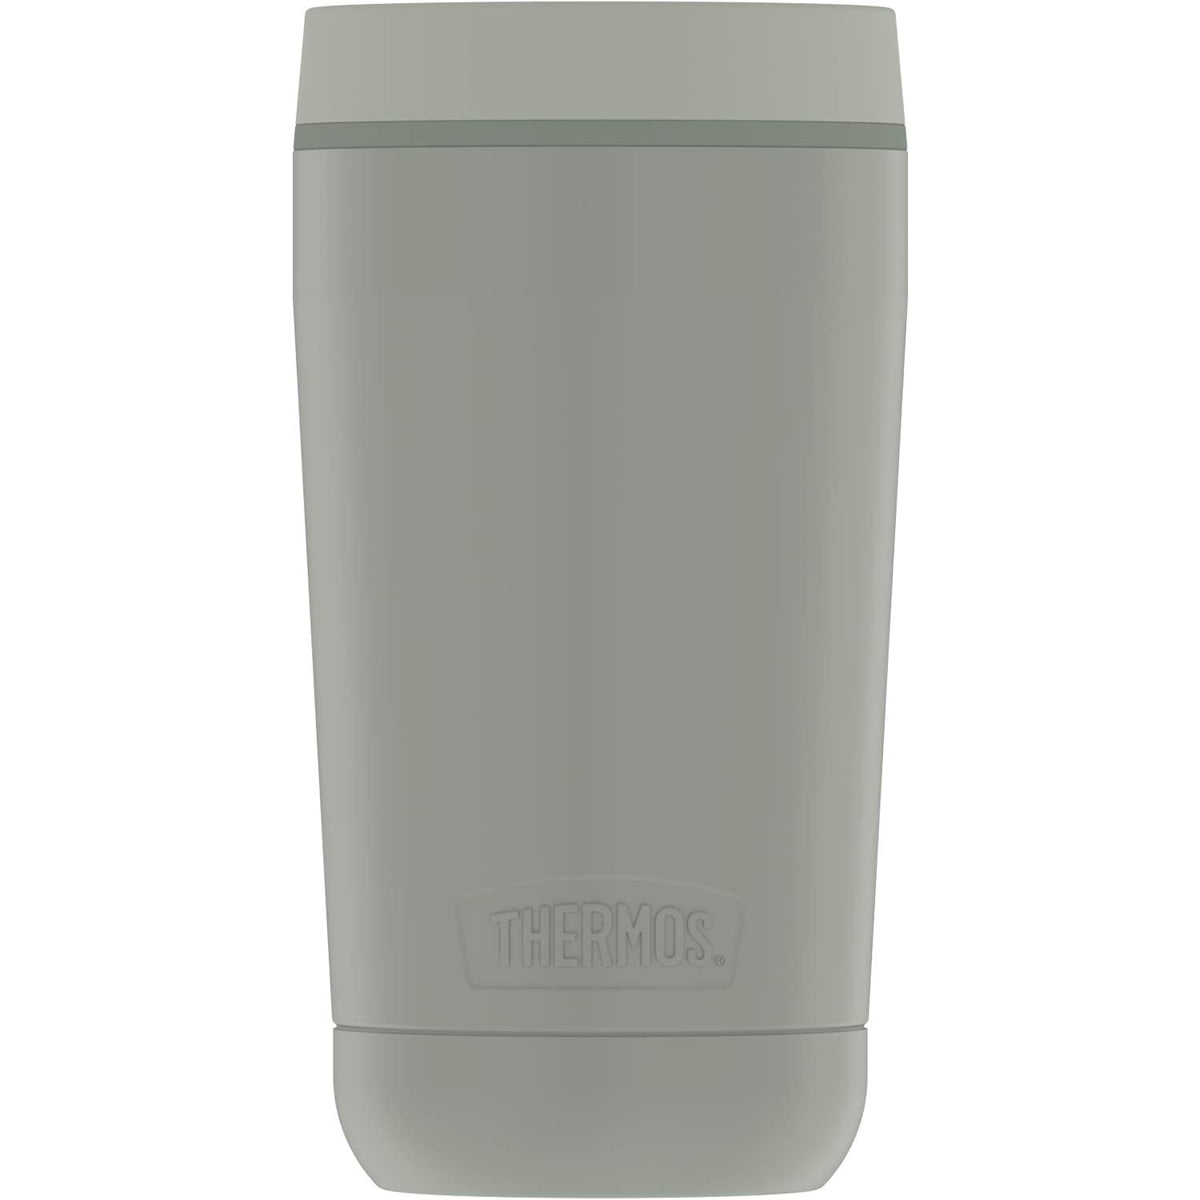 Thermos Guardian 18 Oz Stainless Steel Mug in Espresso Black